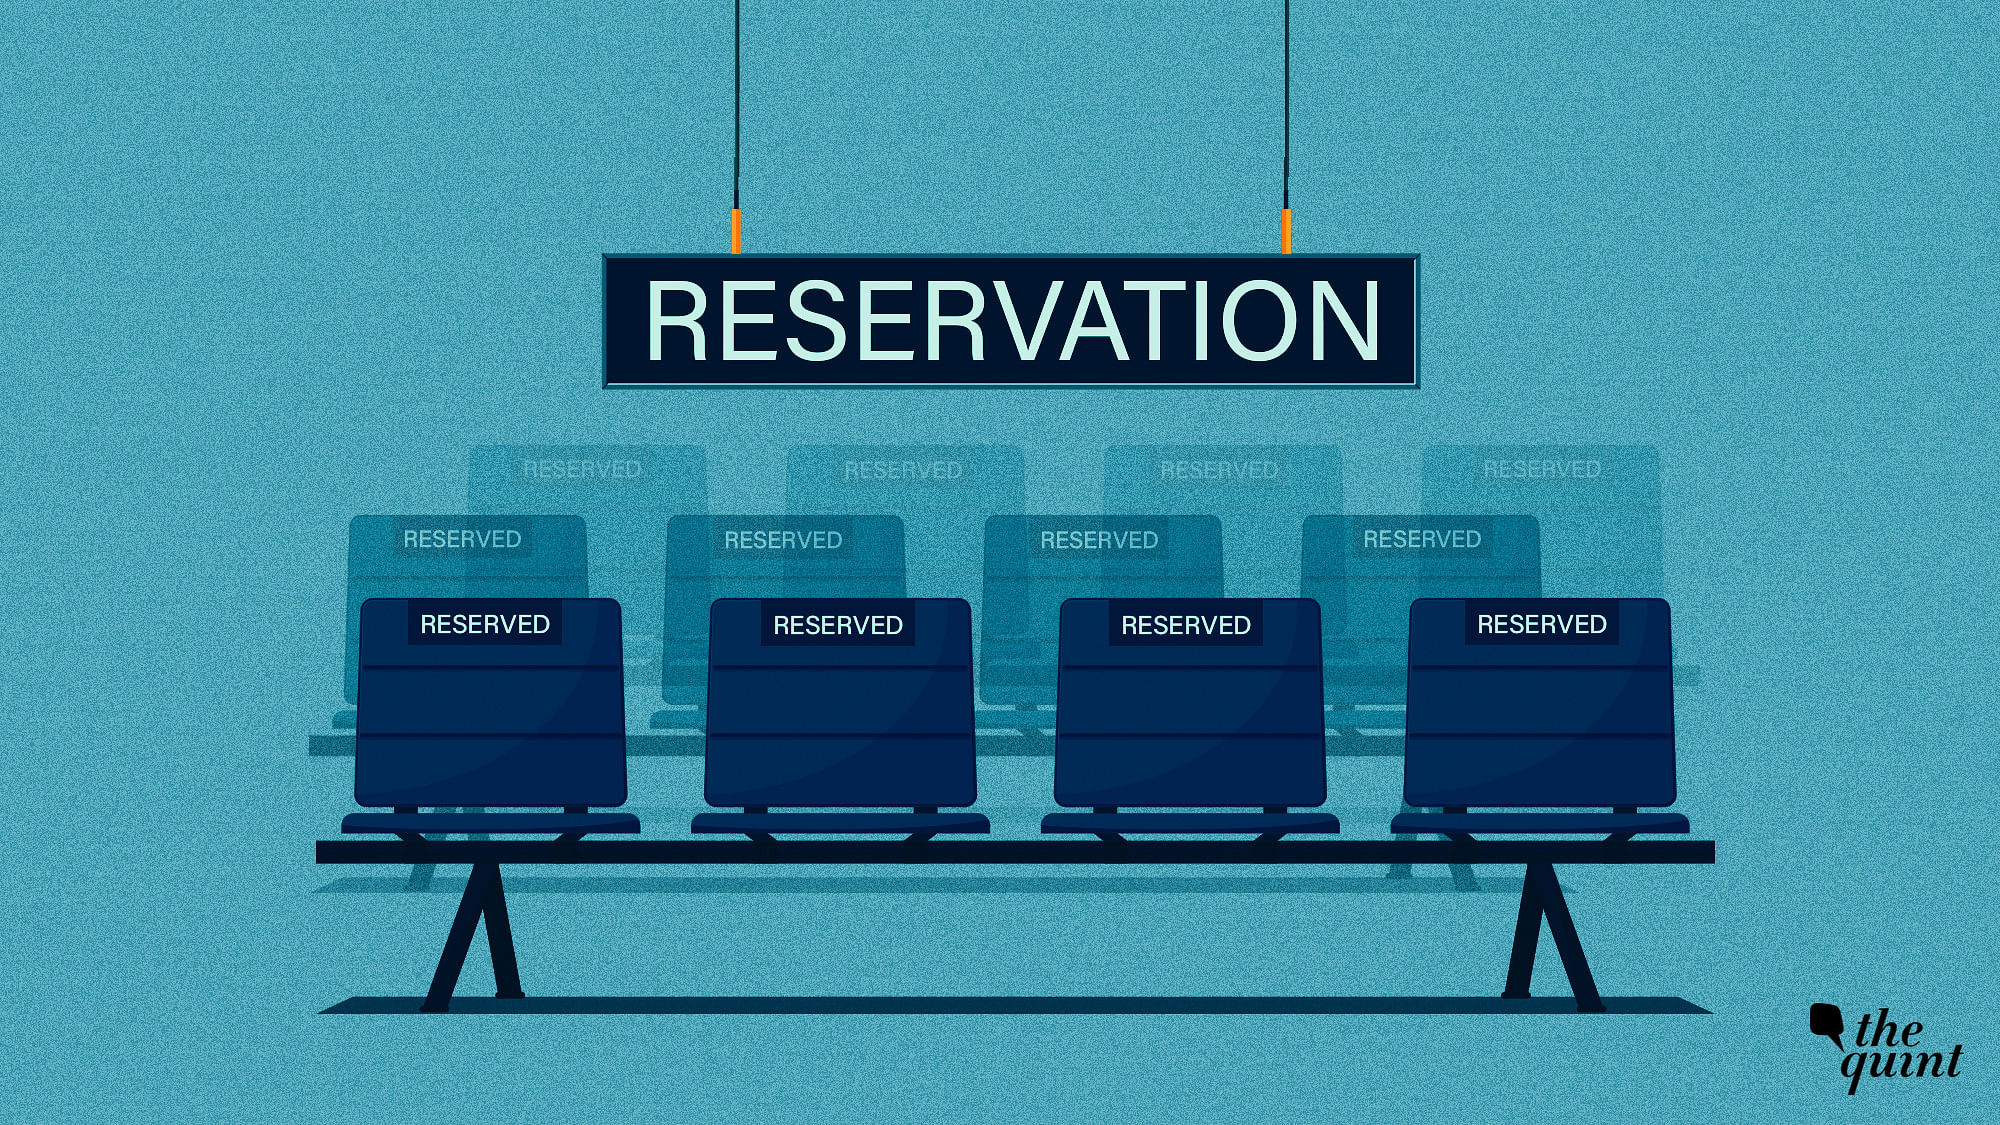 At 69%, Tamil Nadu provides for the highest possible reservation in India. &nbsp;